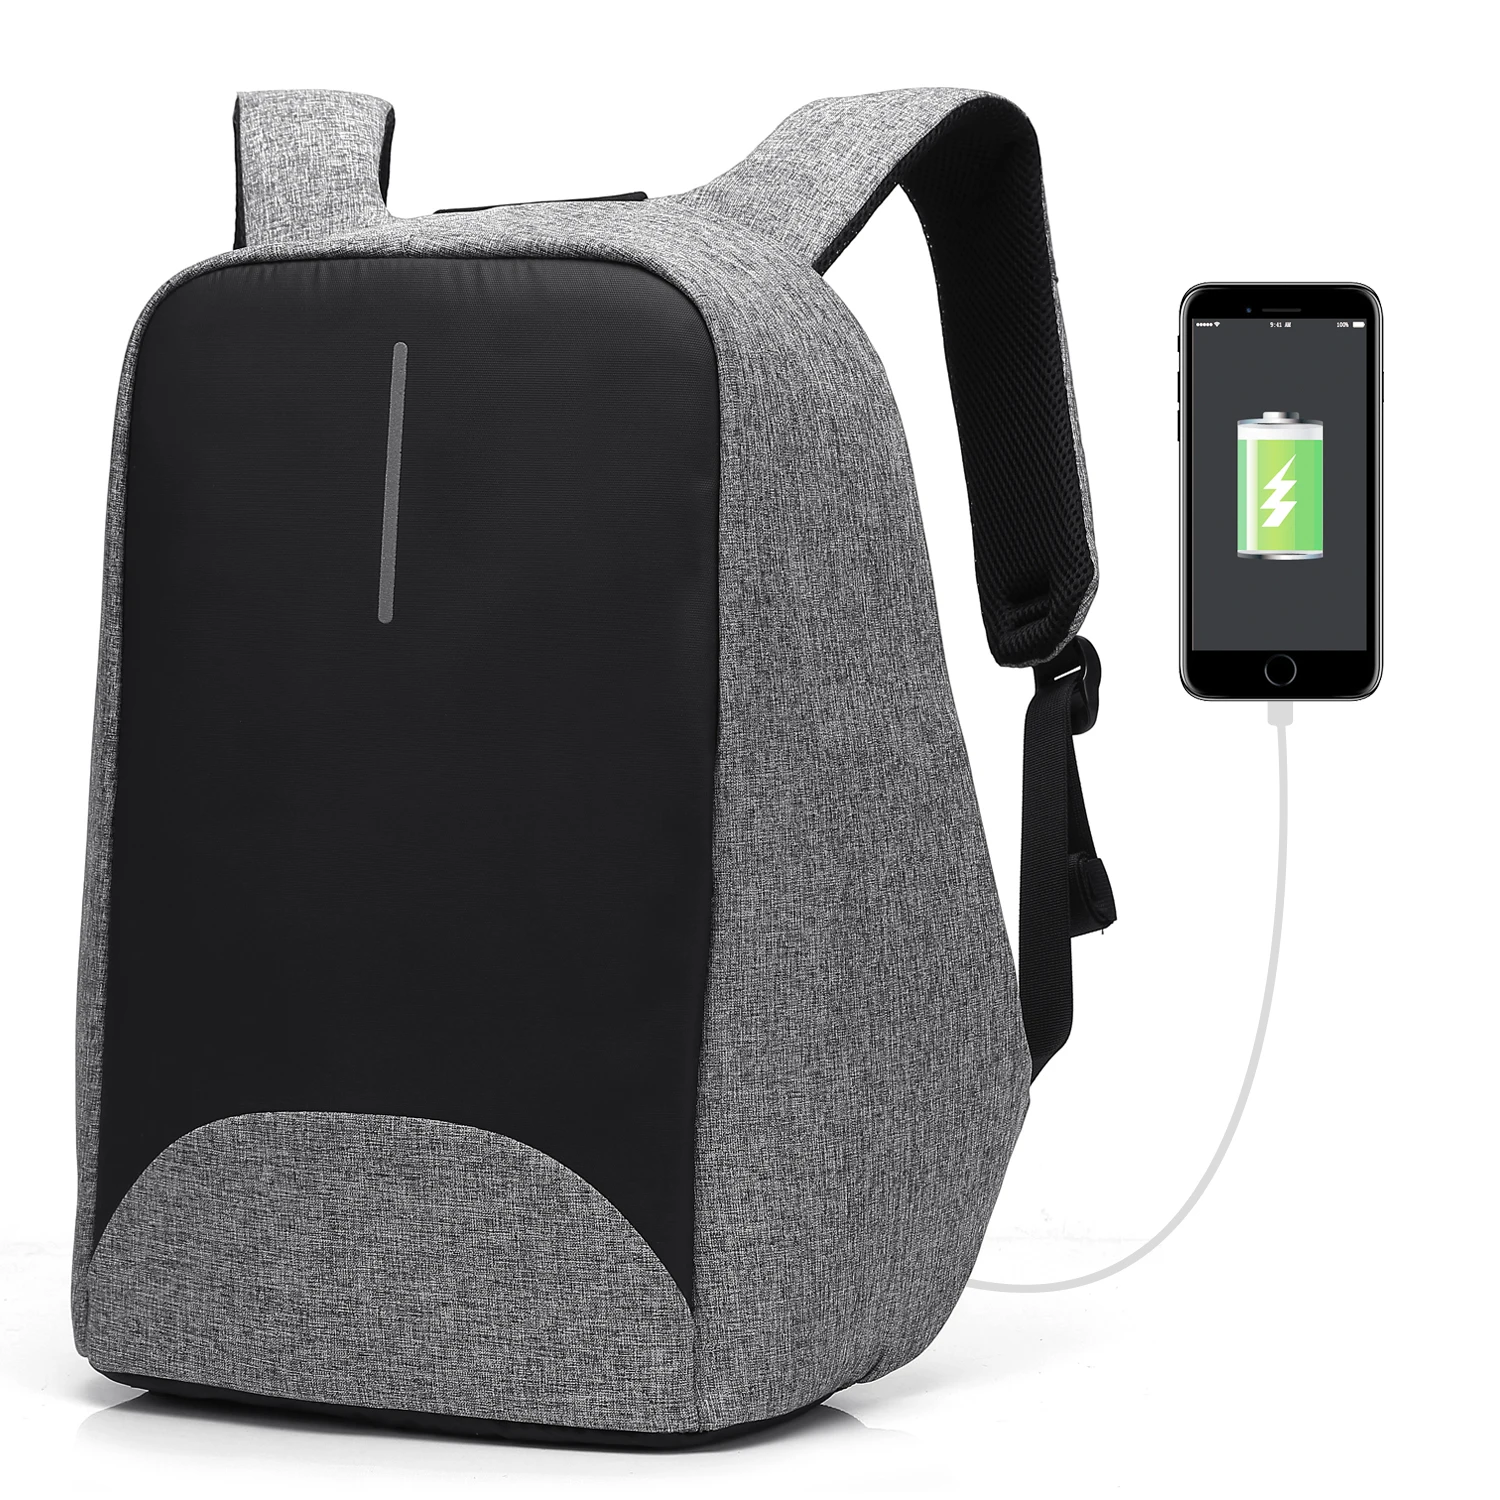 

CoolBell 15.6 Inch Laptop Backpack With USB Port Charging City Anti-theft Bag Functional Knapsack Light-weight Water-resistant